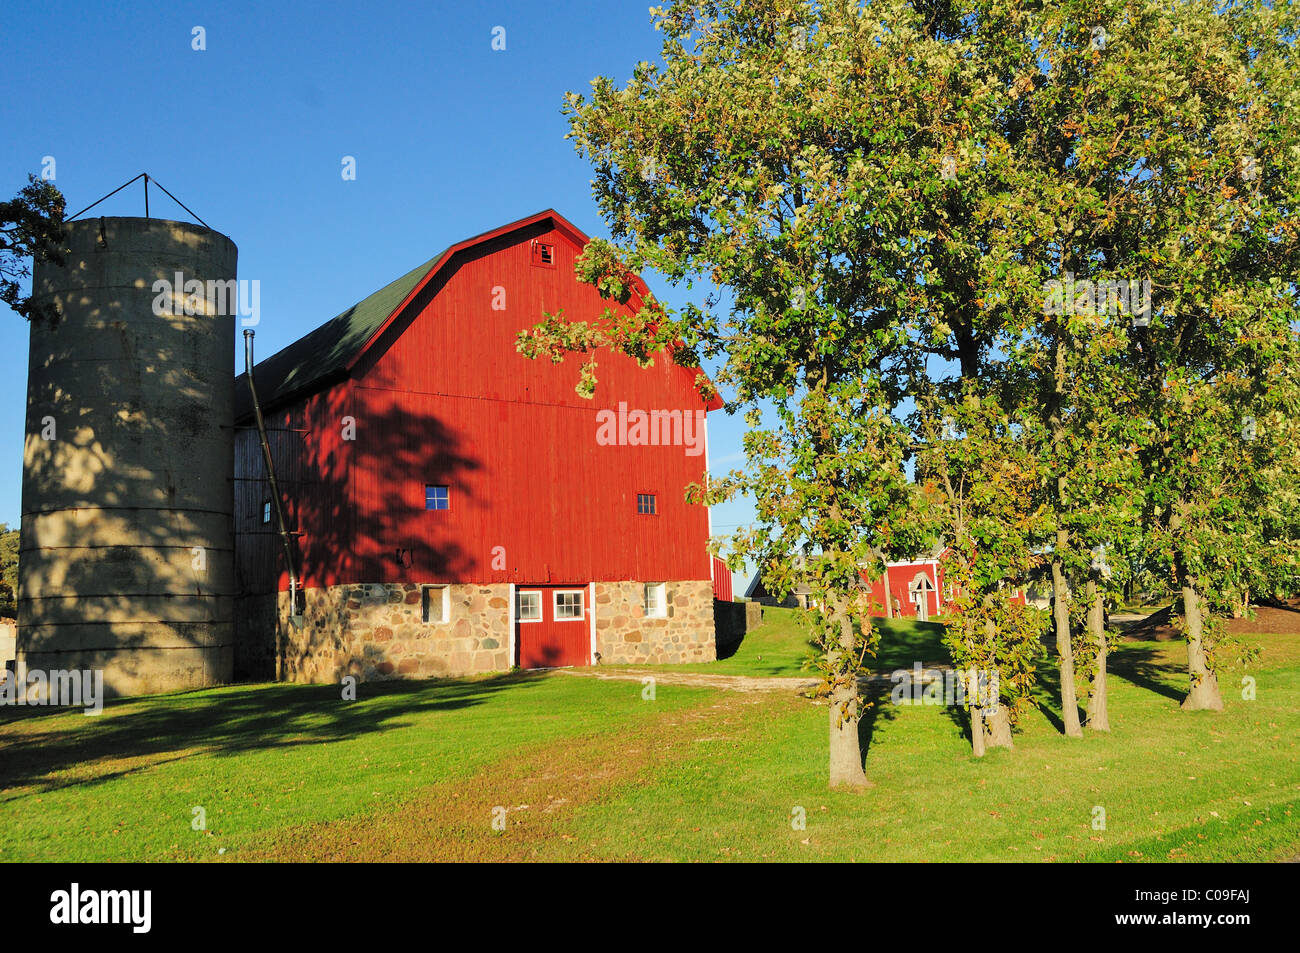 Hampshire, Illinois, USA. A large red barn built on a stone foundation basks in the late afternoon, autumn sun. Stock Photo